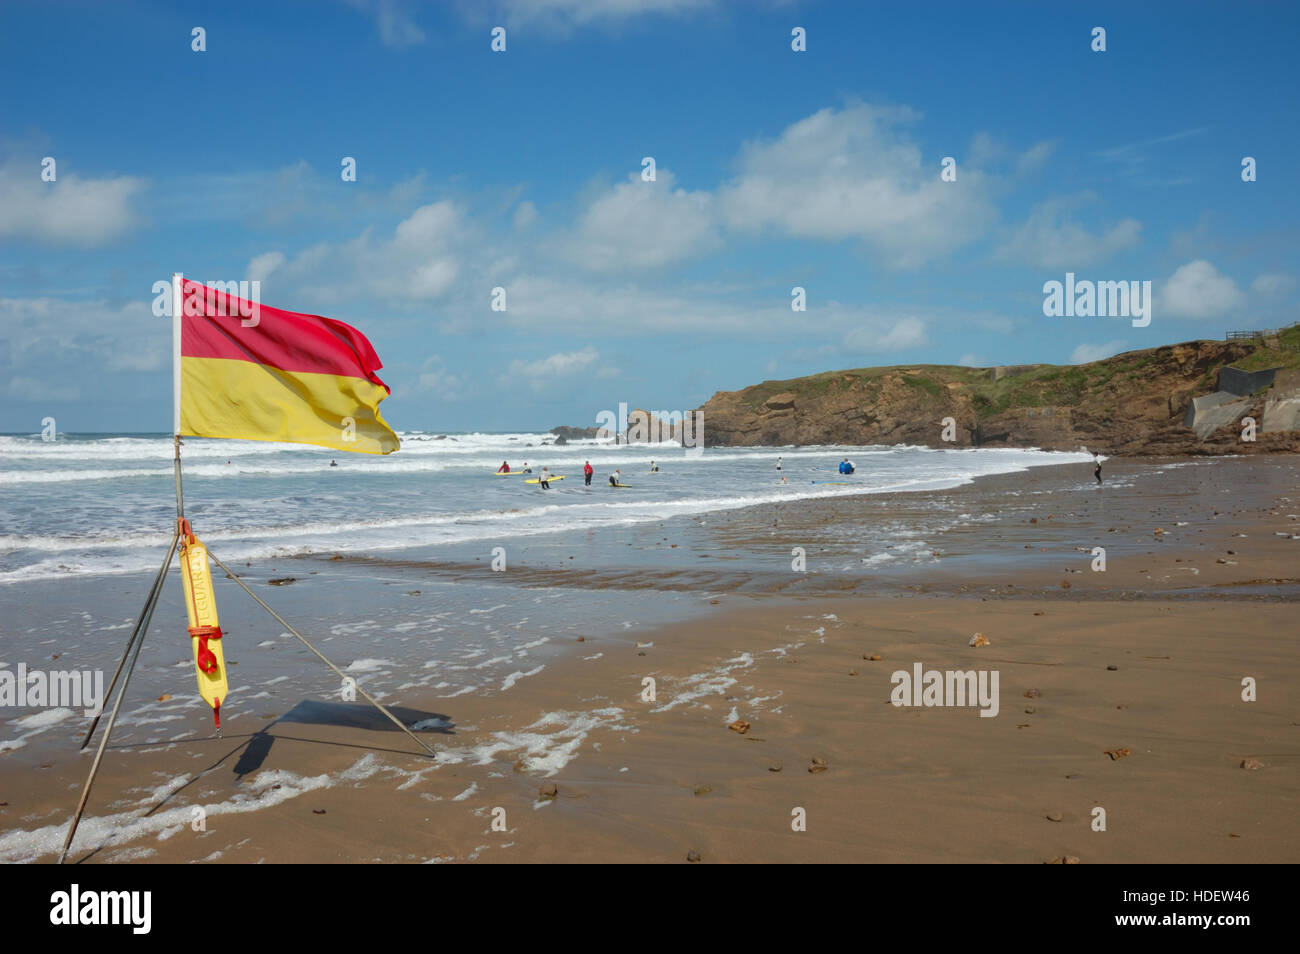 A red and yellow RNLI beach safety flag flying on Crooklets Beach denoting an area patrolled by lifeguards. Stock Photo